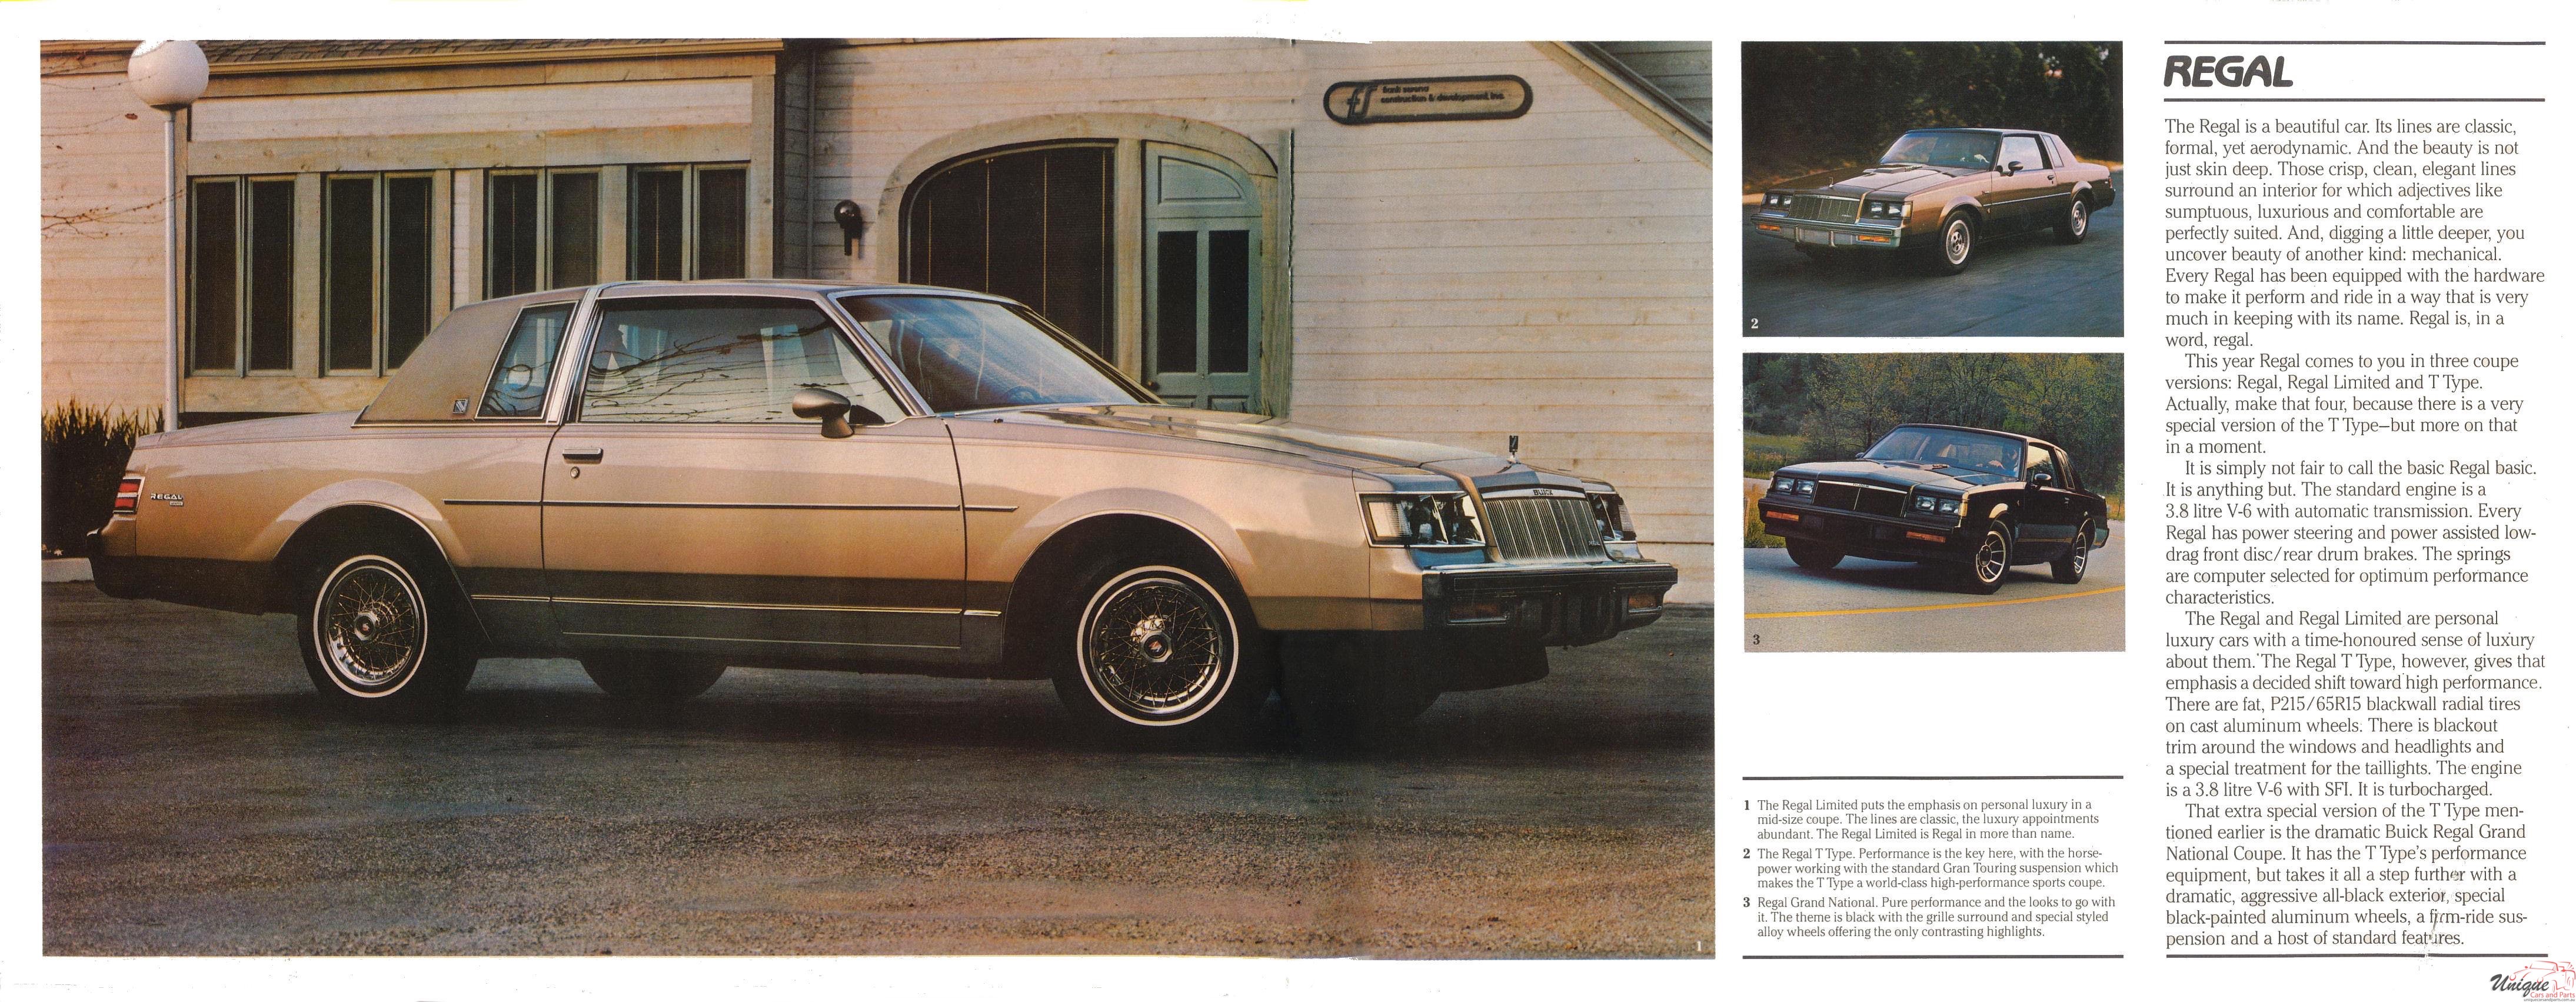 1985 Buick Regal Canadian Brochure Page 6